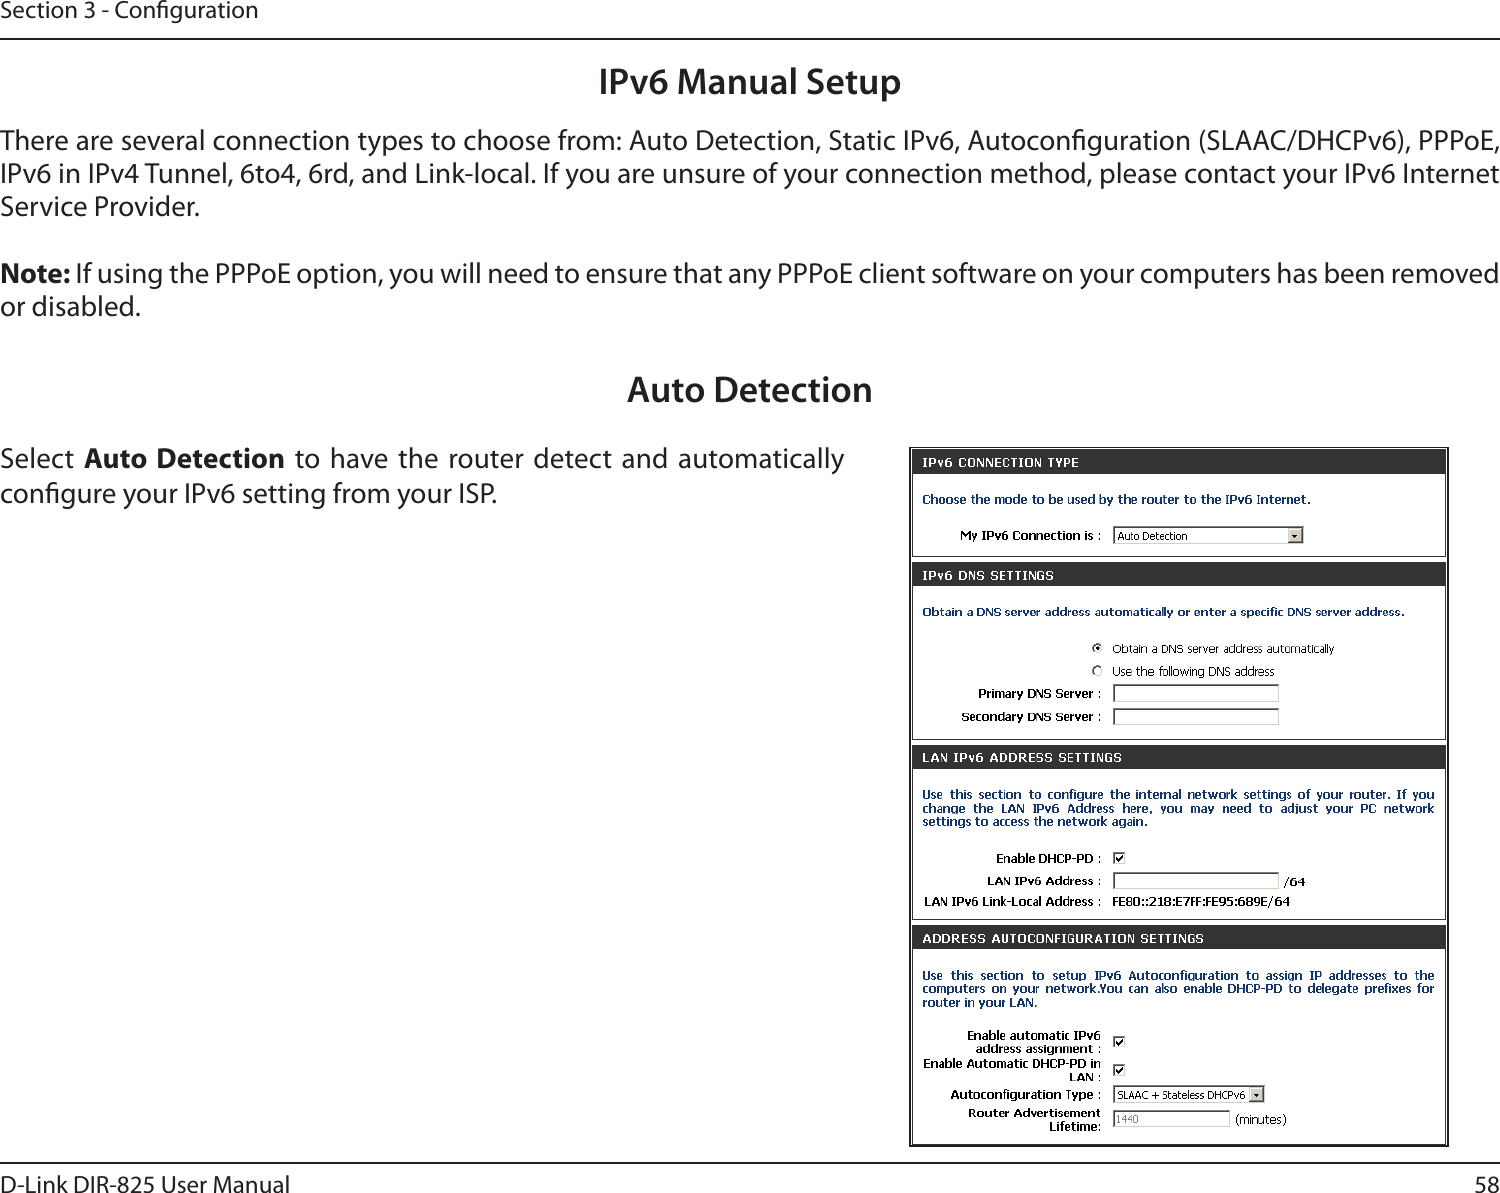 58D-Link DIR-825 User ManualSection 3 - CongurationIPv6 Manual SetupThere are several connection types to choose from: Auto Detection, Static IPv6, Autoconguration (SLAAC/DHCPv6), PPPoE, IPv6 in IPv4 Tunnel, 6to4, 6rd, and Link-local. If you are unsure of your connection method, please contact your IPv6 Internet Service Provider. Note: If using the PPPoE option, you will need to ensure that any PPPoE client software on your computers has been removed or disabled.Auto DetectionSelect Auto Detection  to have the router detect  and automatically congure your IPv6 setting from your ISP.